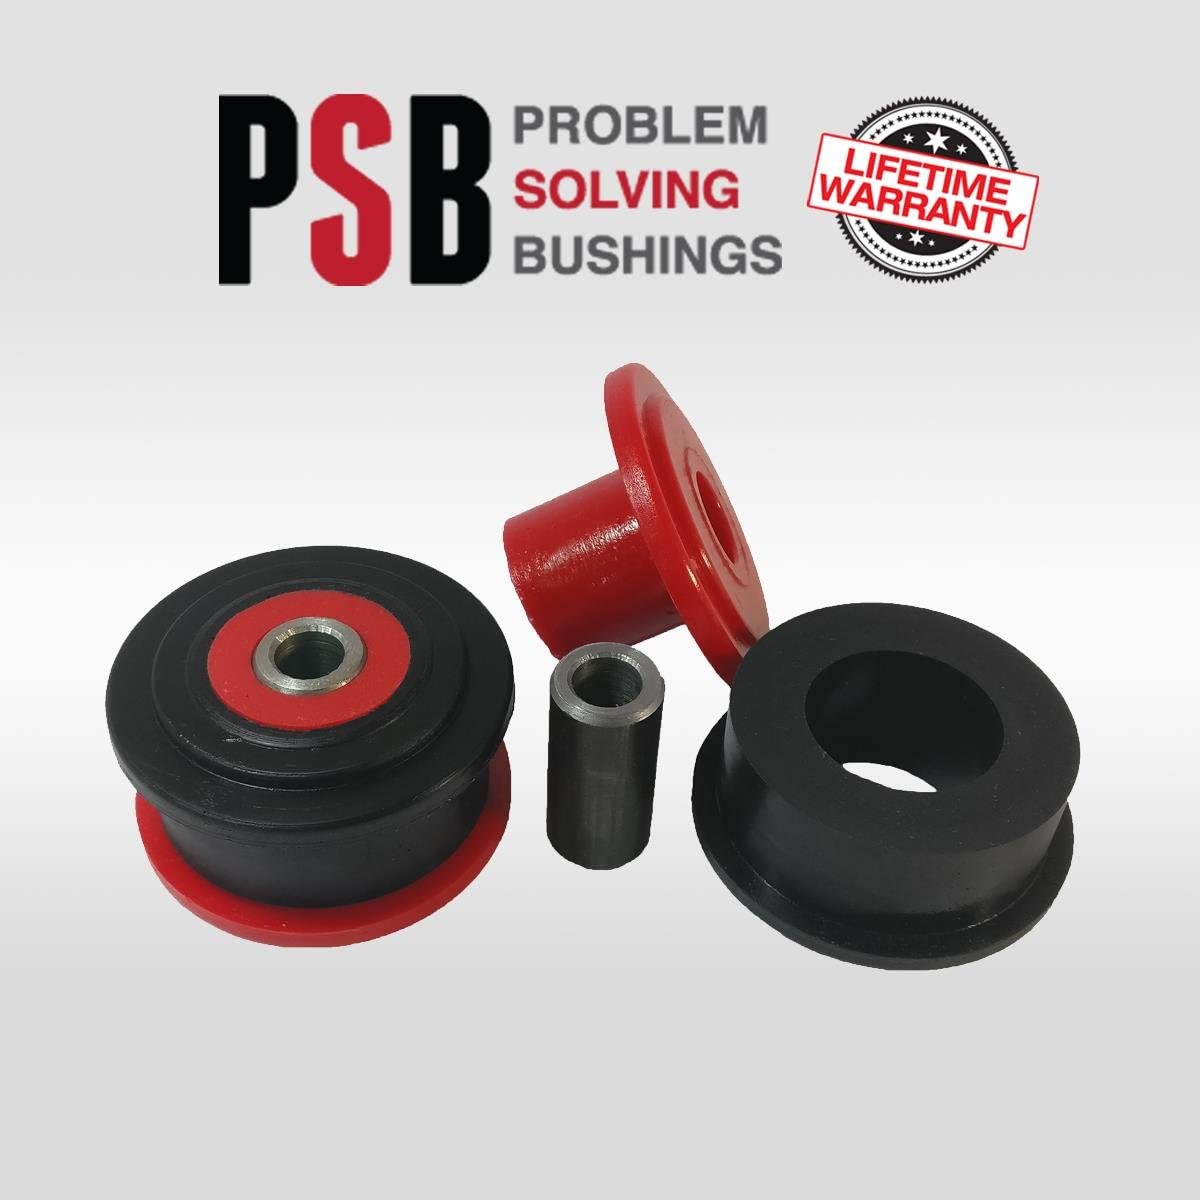 2 x Front Wishbone Rear Poly Bushing Forged Arm Replacement for Audi TT MK1 (98-06) - PSB 733